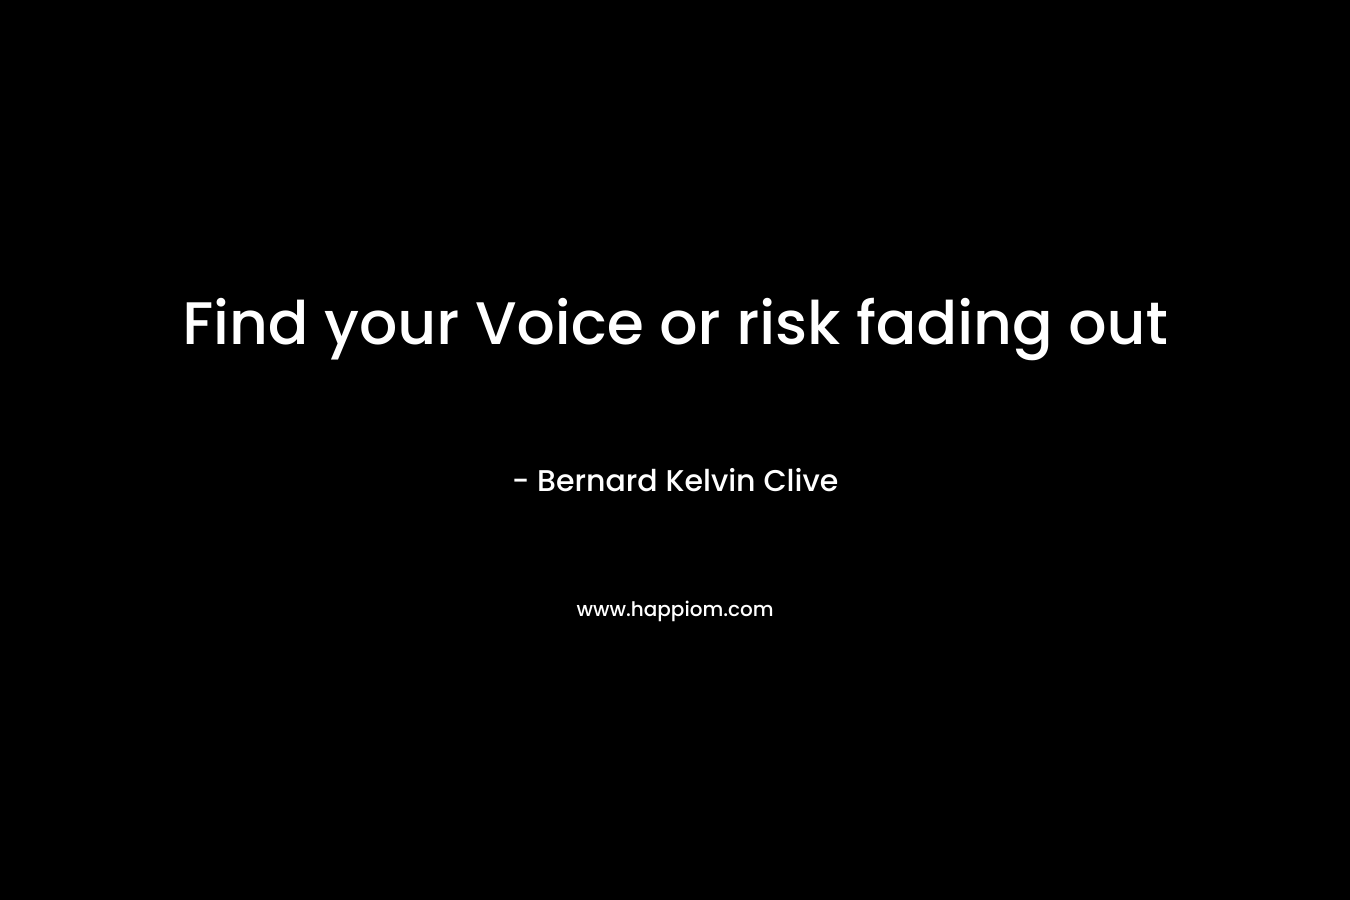 Find your Voice or risk fading out